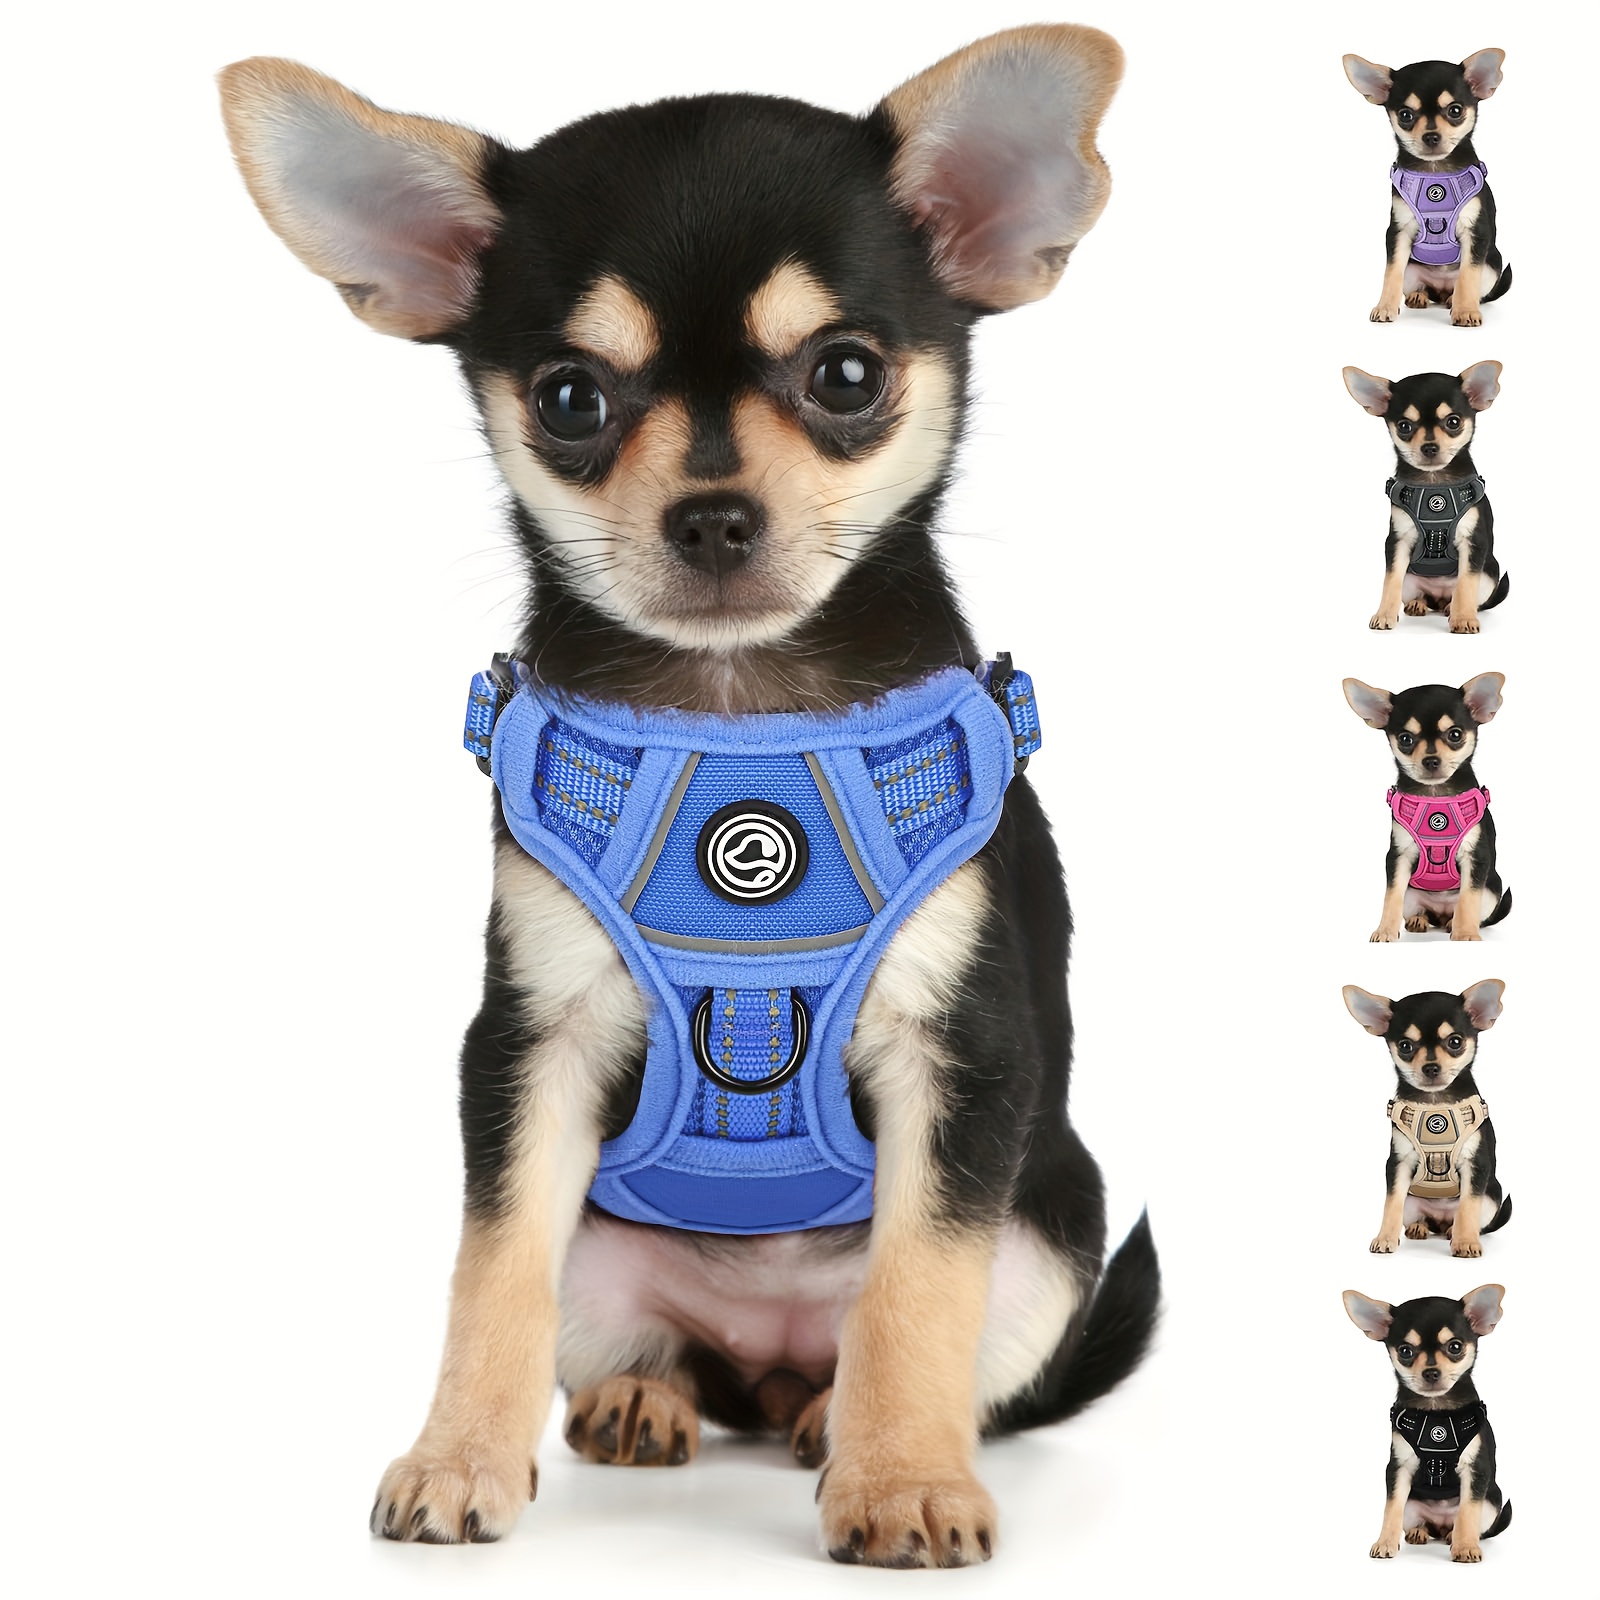 

Dog Harness, Adjustable Soft Padded Dog Vest, Reflective No-choke Pet Oxford Vest For Small, Medium Dogs And Cats Walking Training.